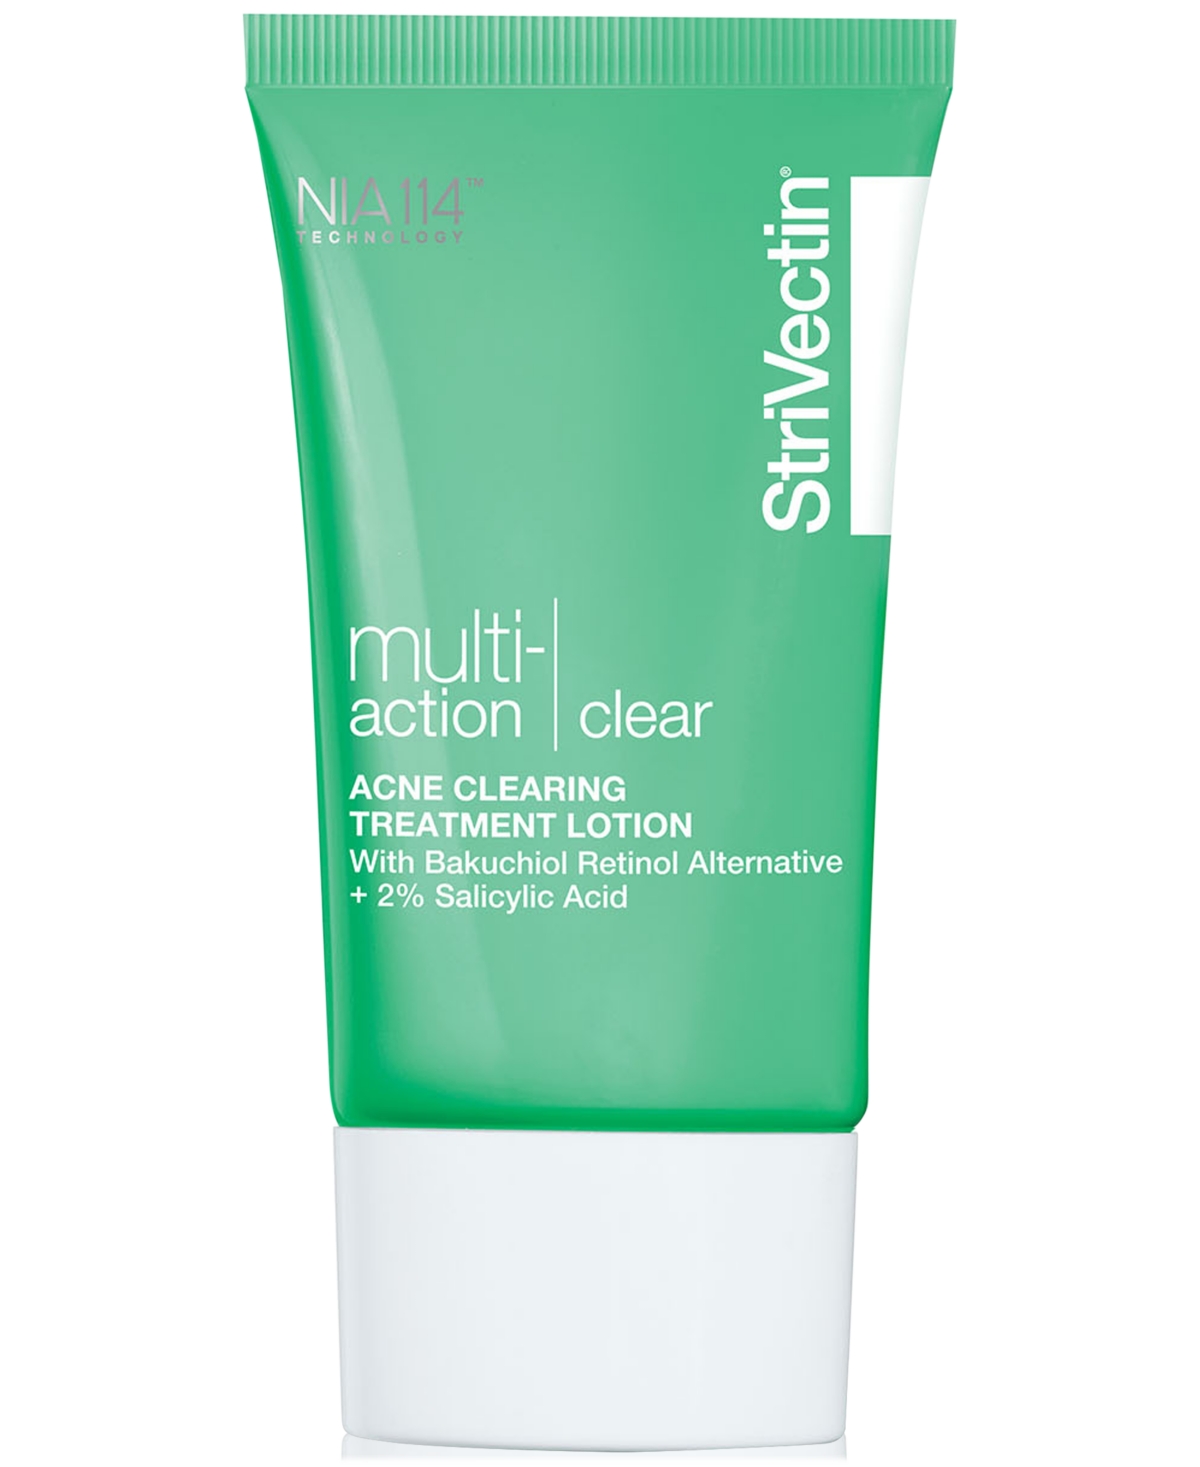 Acne Clearing Treatment Lotion, 1.7oz